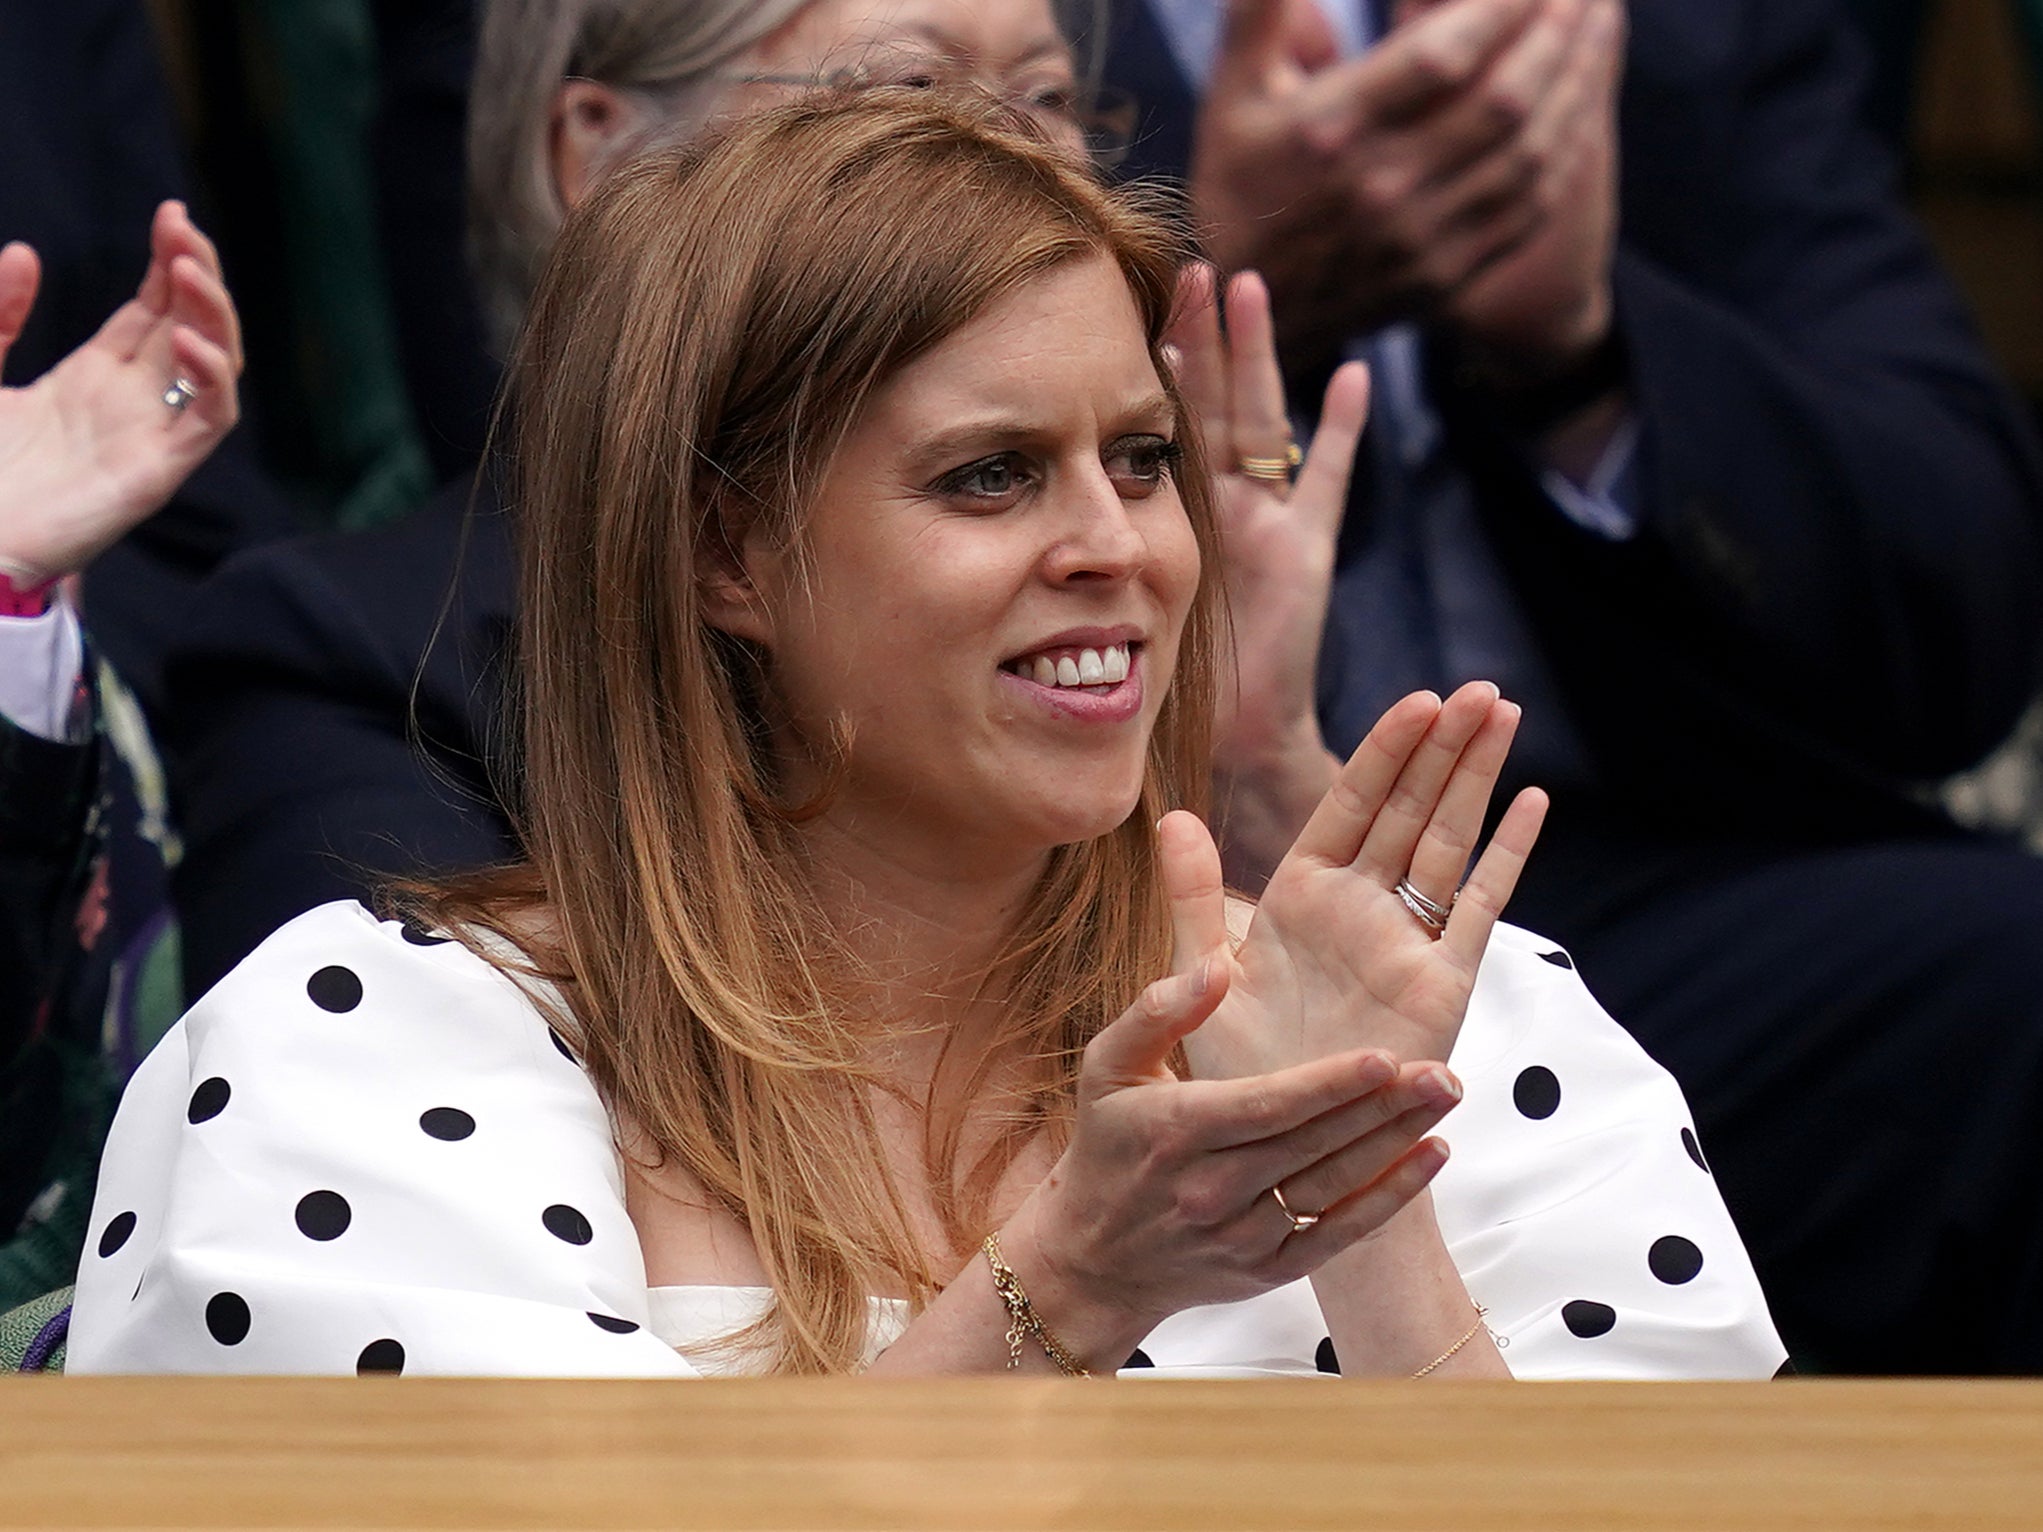 Princess Beatrice says dyslexia is a “gift”.